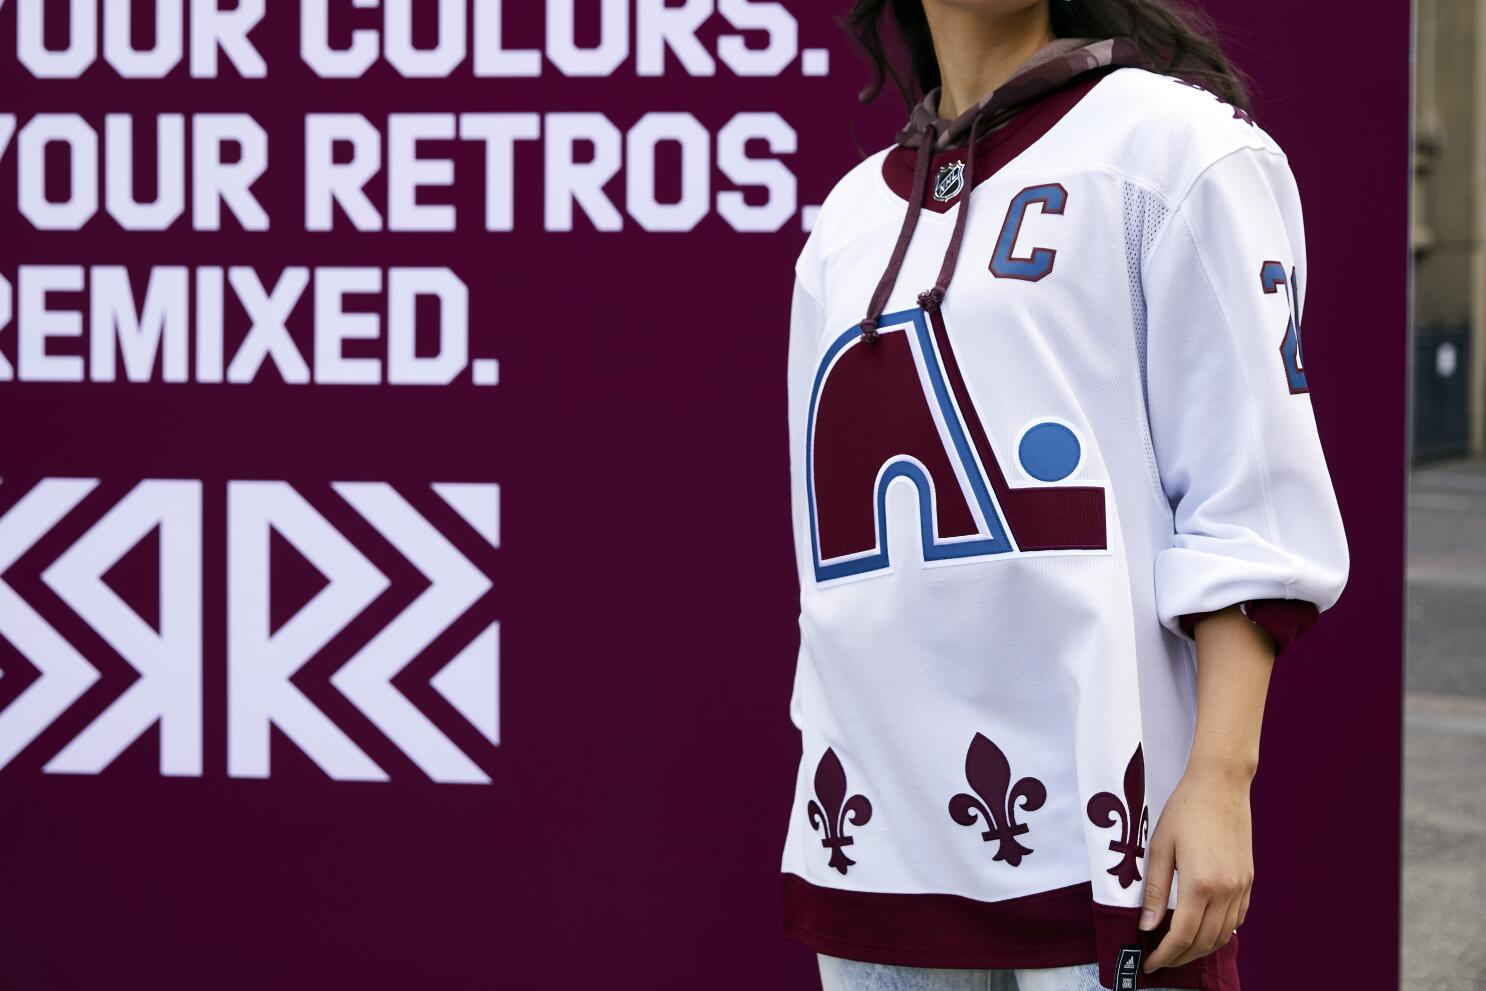 New reverse retro jersey from Adidas's Instagram : r/canes